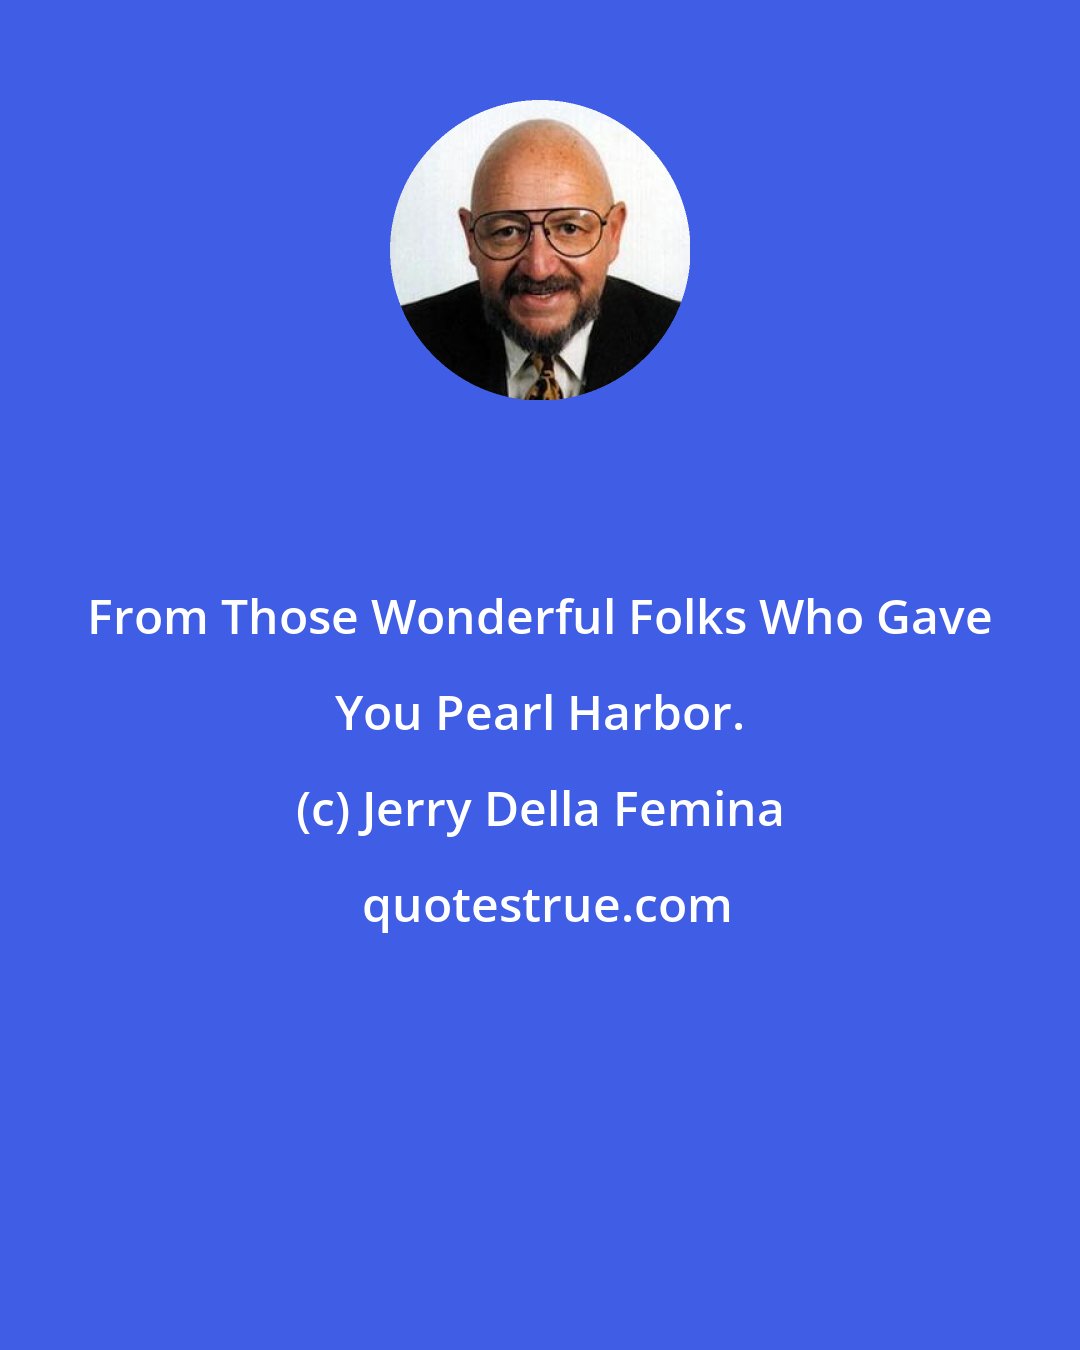 Jerry Della Femina: From Those Wonderful Folks Who Gave You Pearl Harbor.